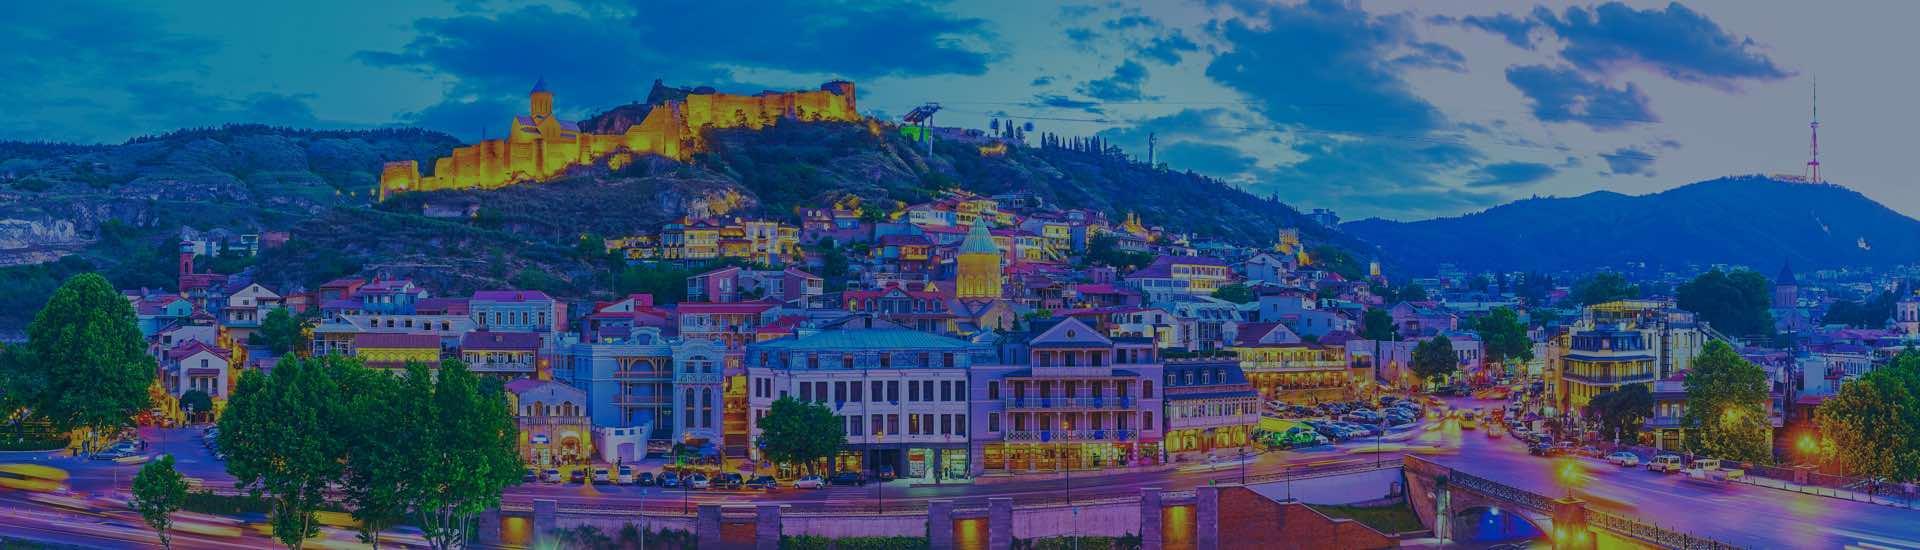 Find and Book Any Hotel in Tbilisi